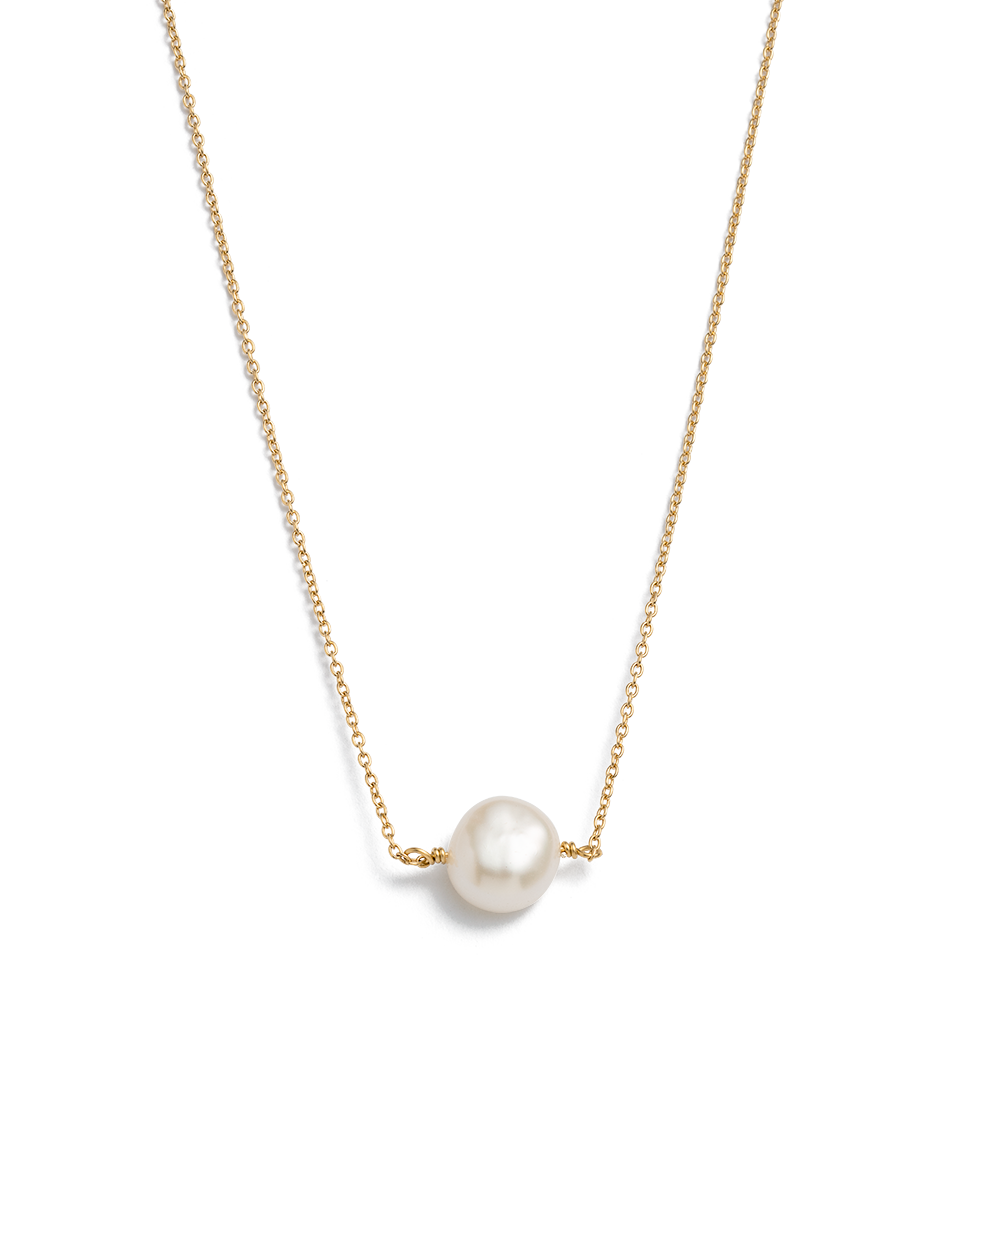 PEARL CHOKER (18K GOLD PLATED) - IMAGE 1